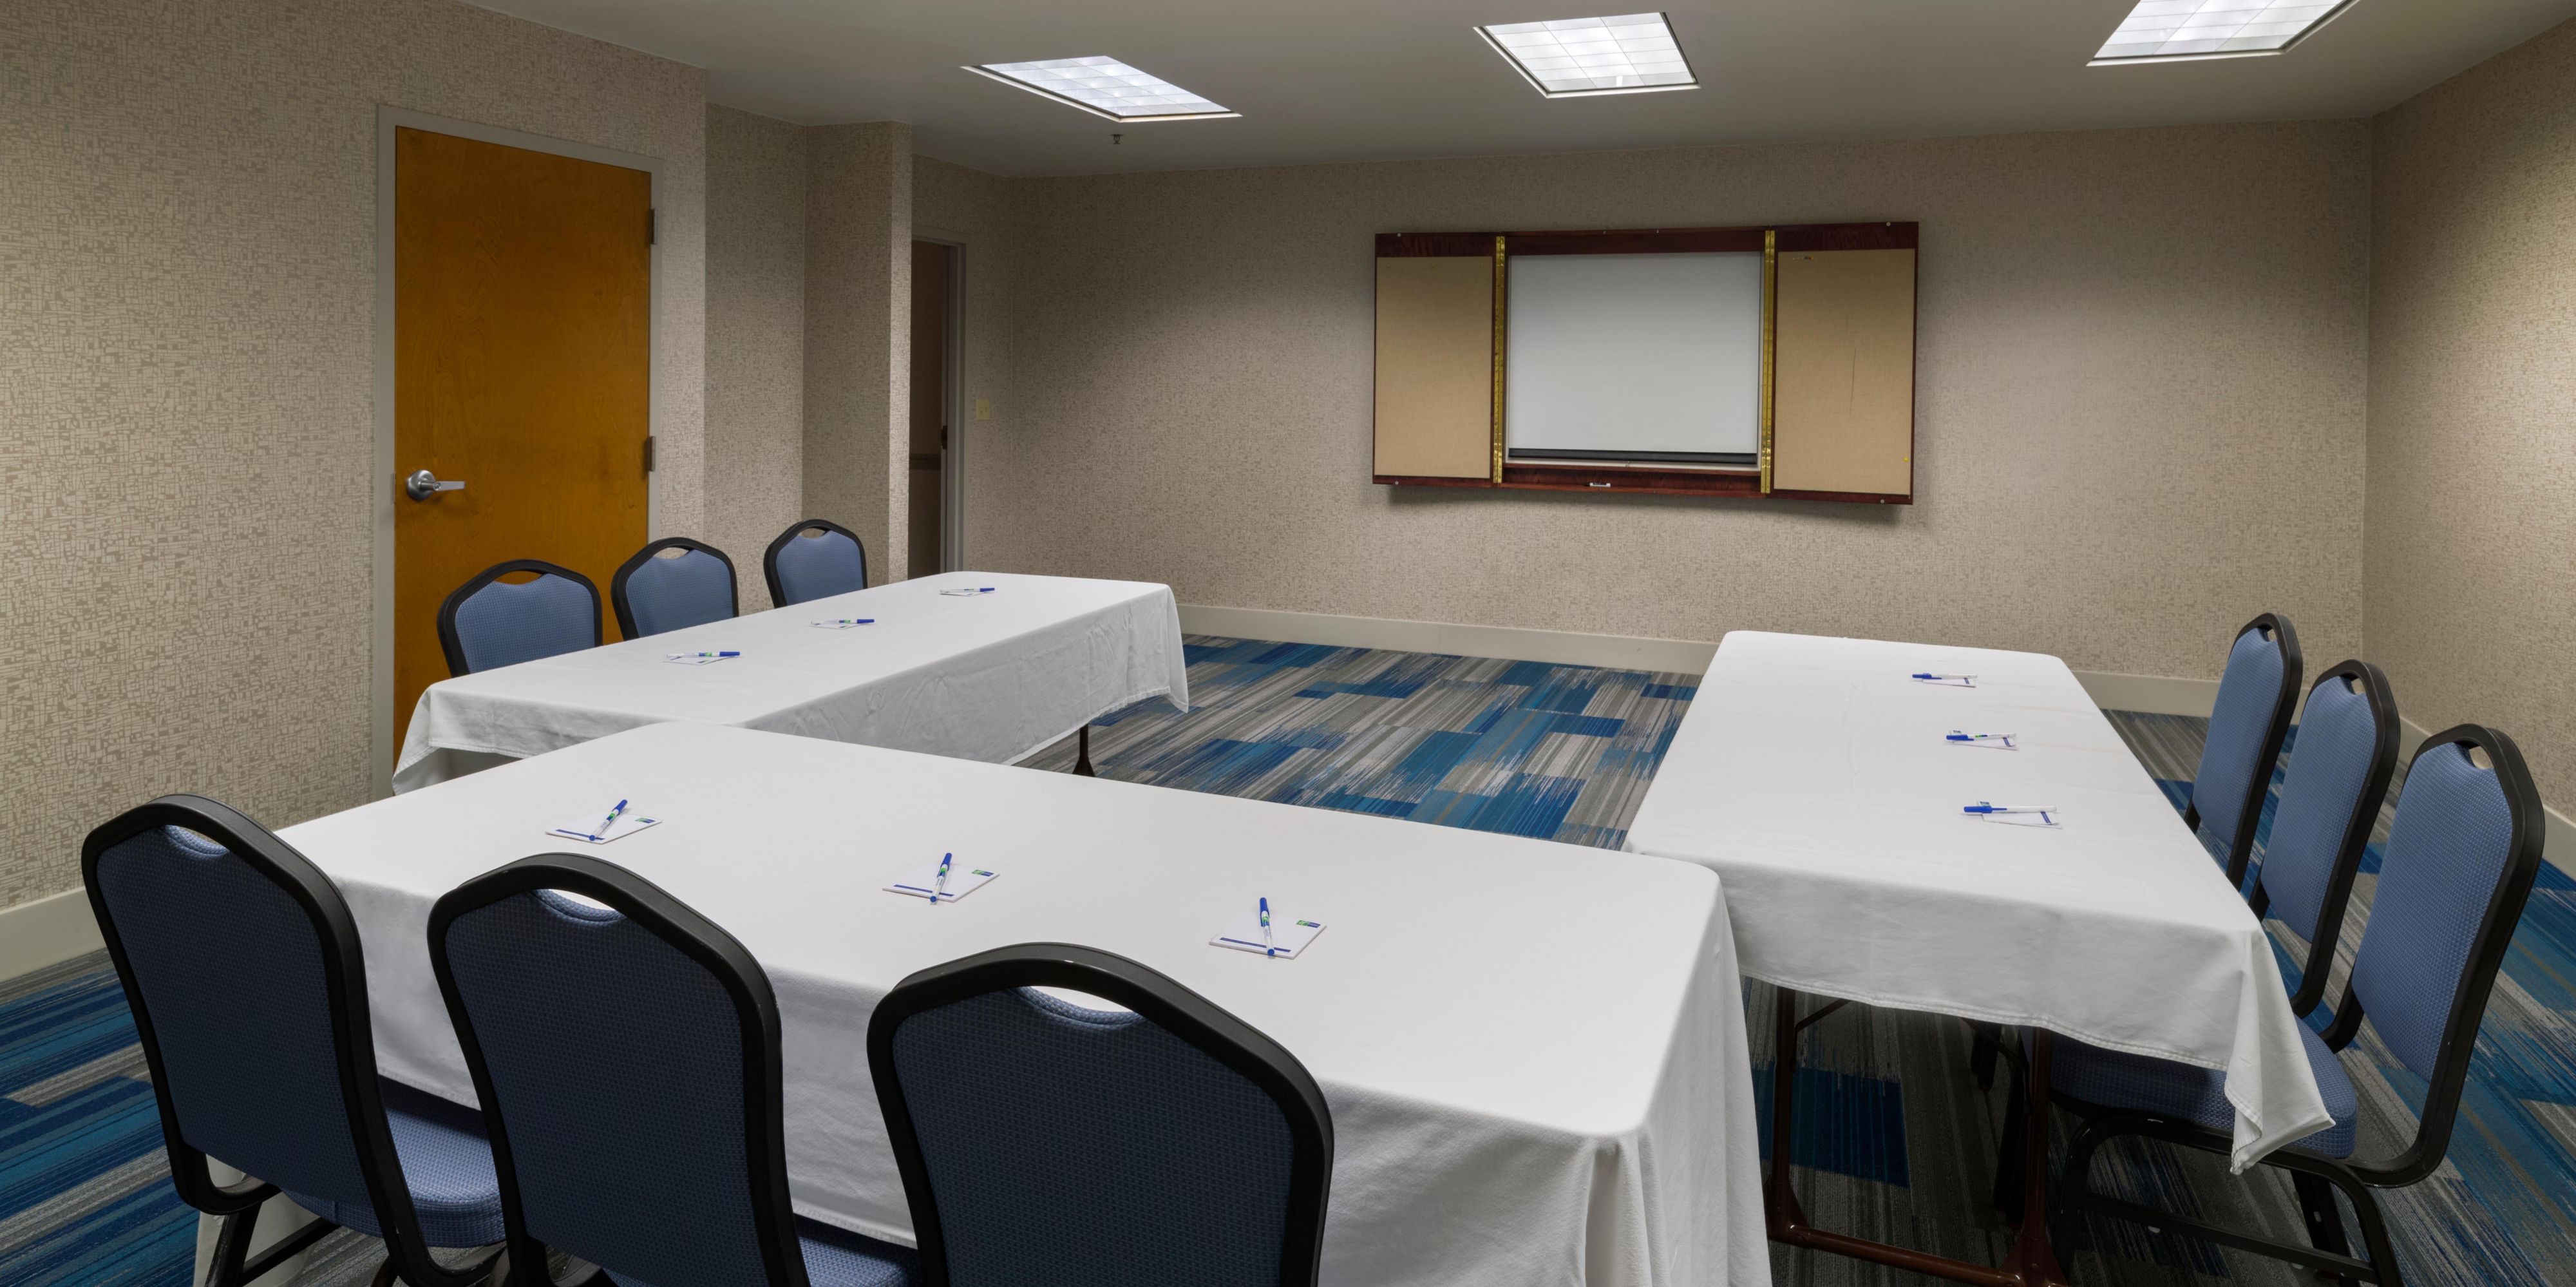 Host your small to medium-sized meeting or event with us!